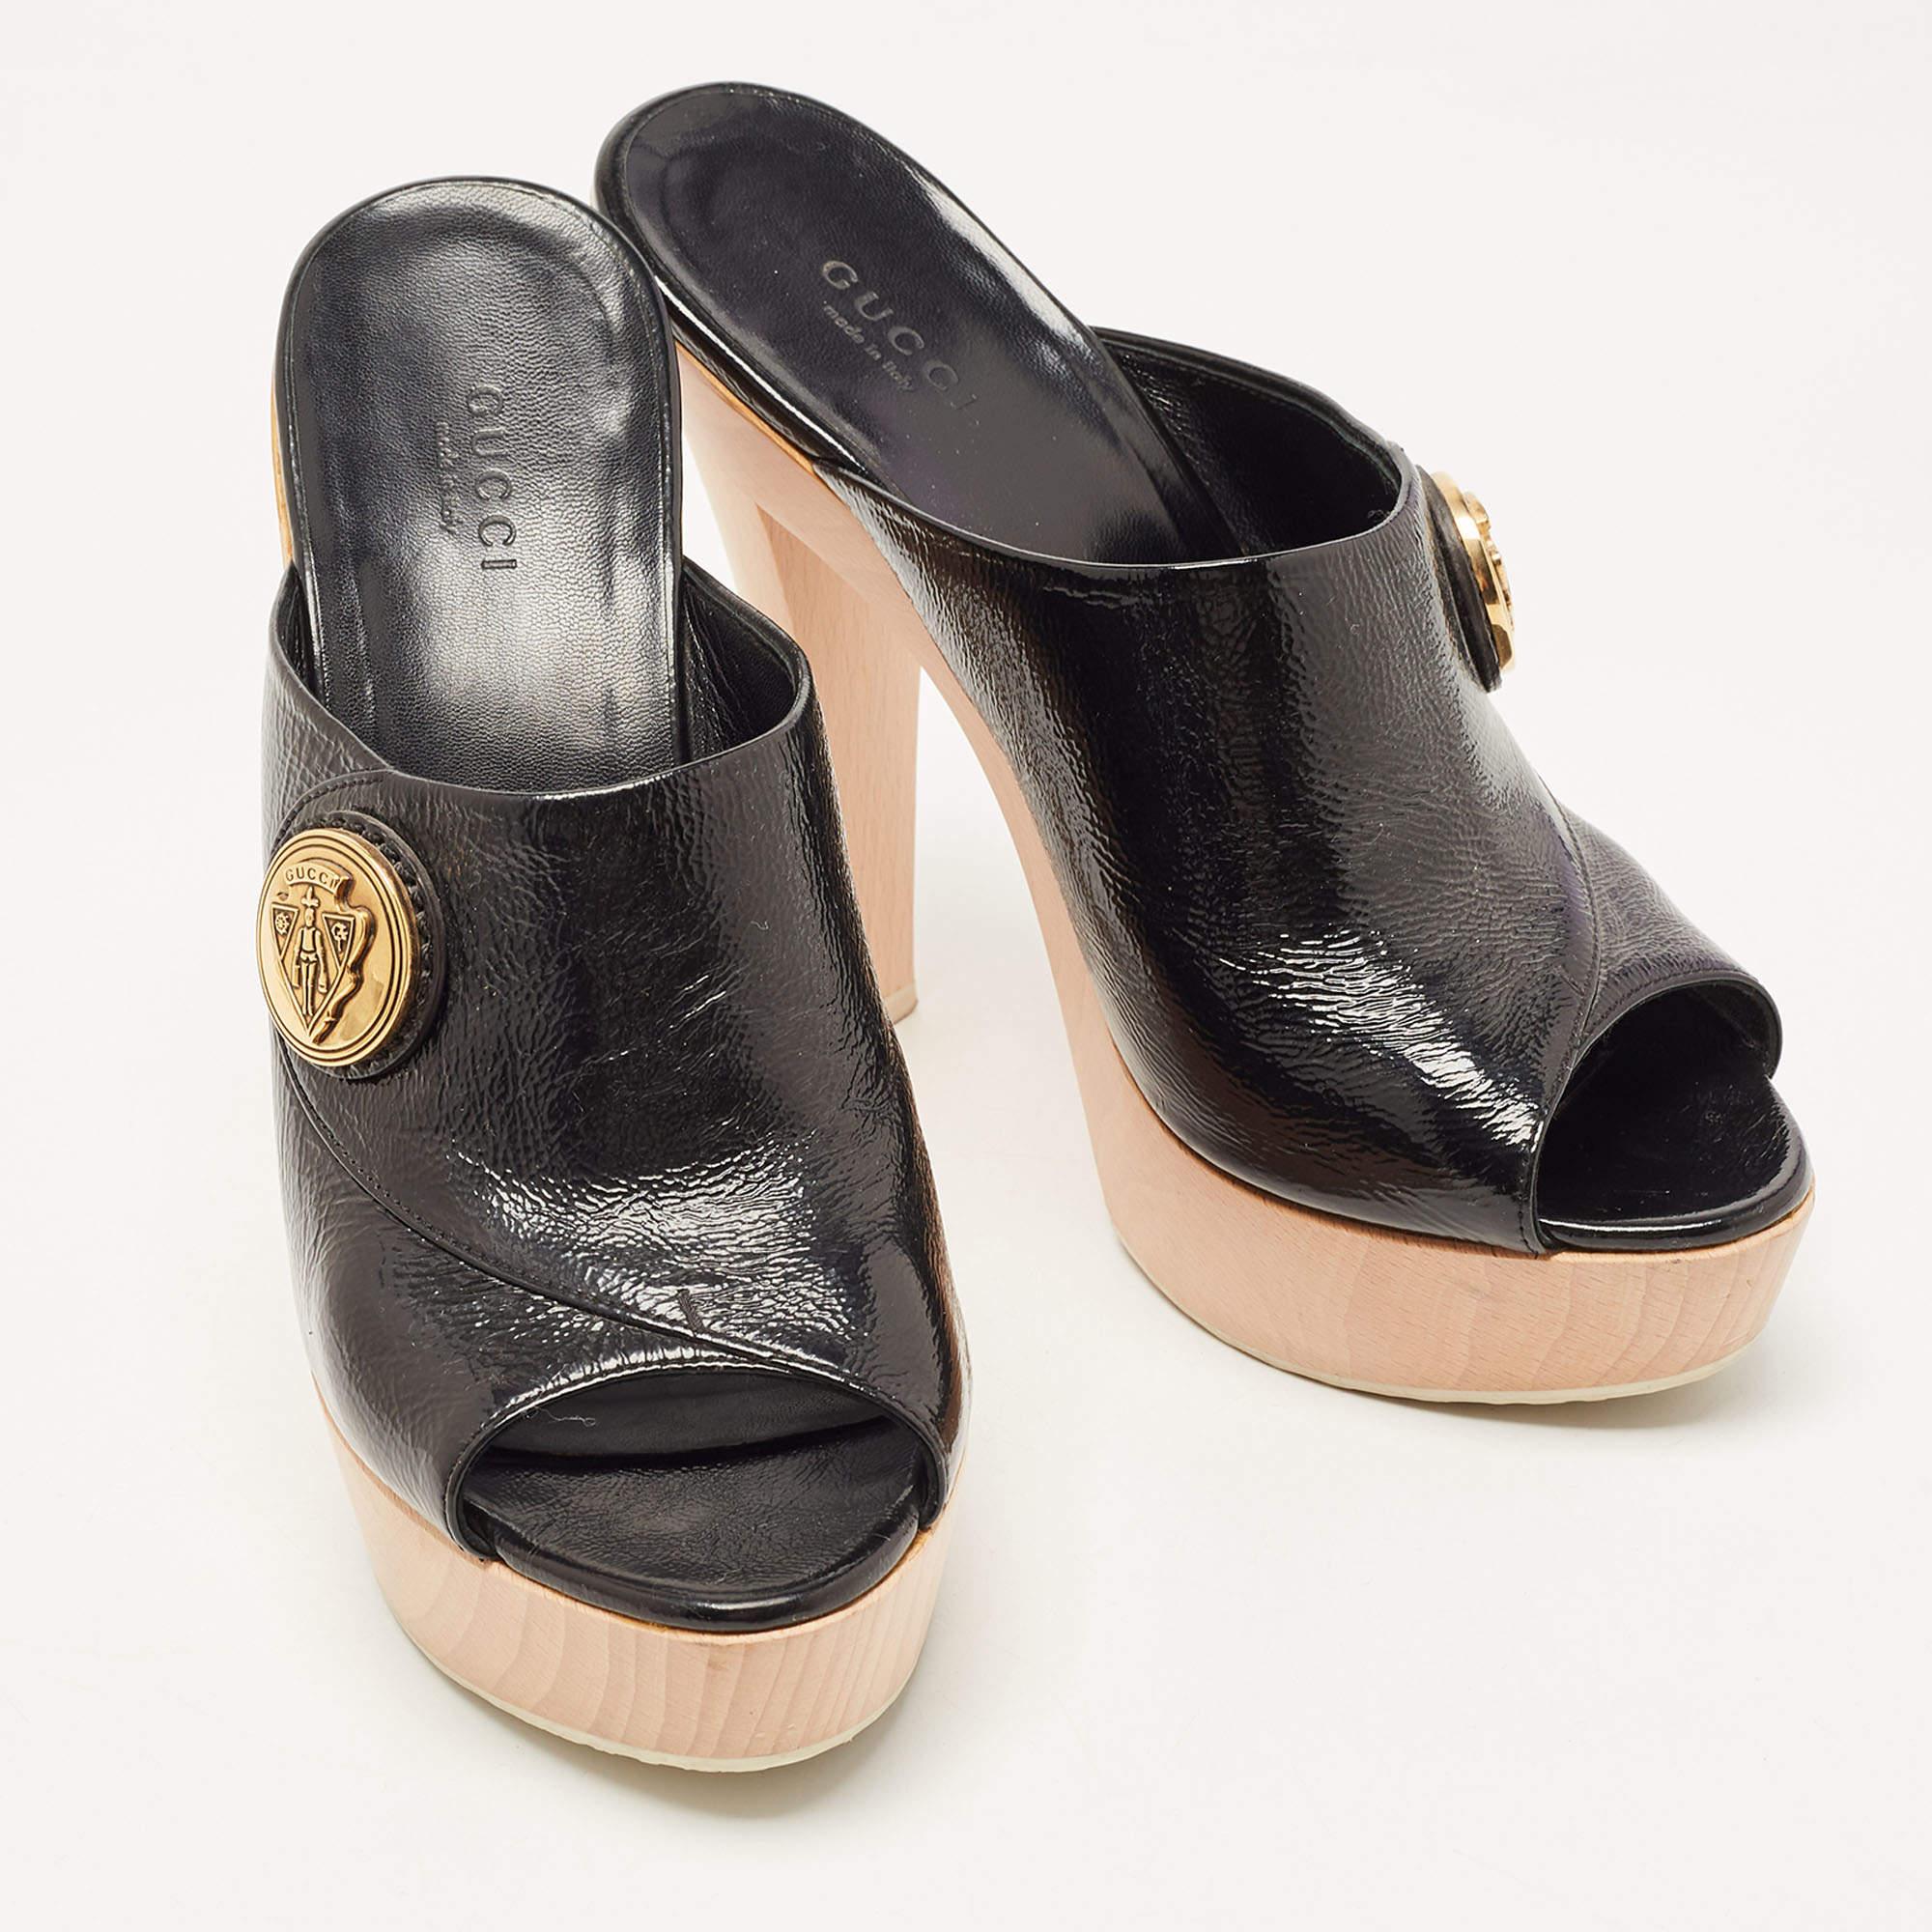 These Gucci Hysteria platform clogs are comfortable and stylish. They have been crafted in Italy and are made from patent leather in black. They have an open toe silhouette, platforms, and 14.5cm heels. They come with leather lining and feature the